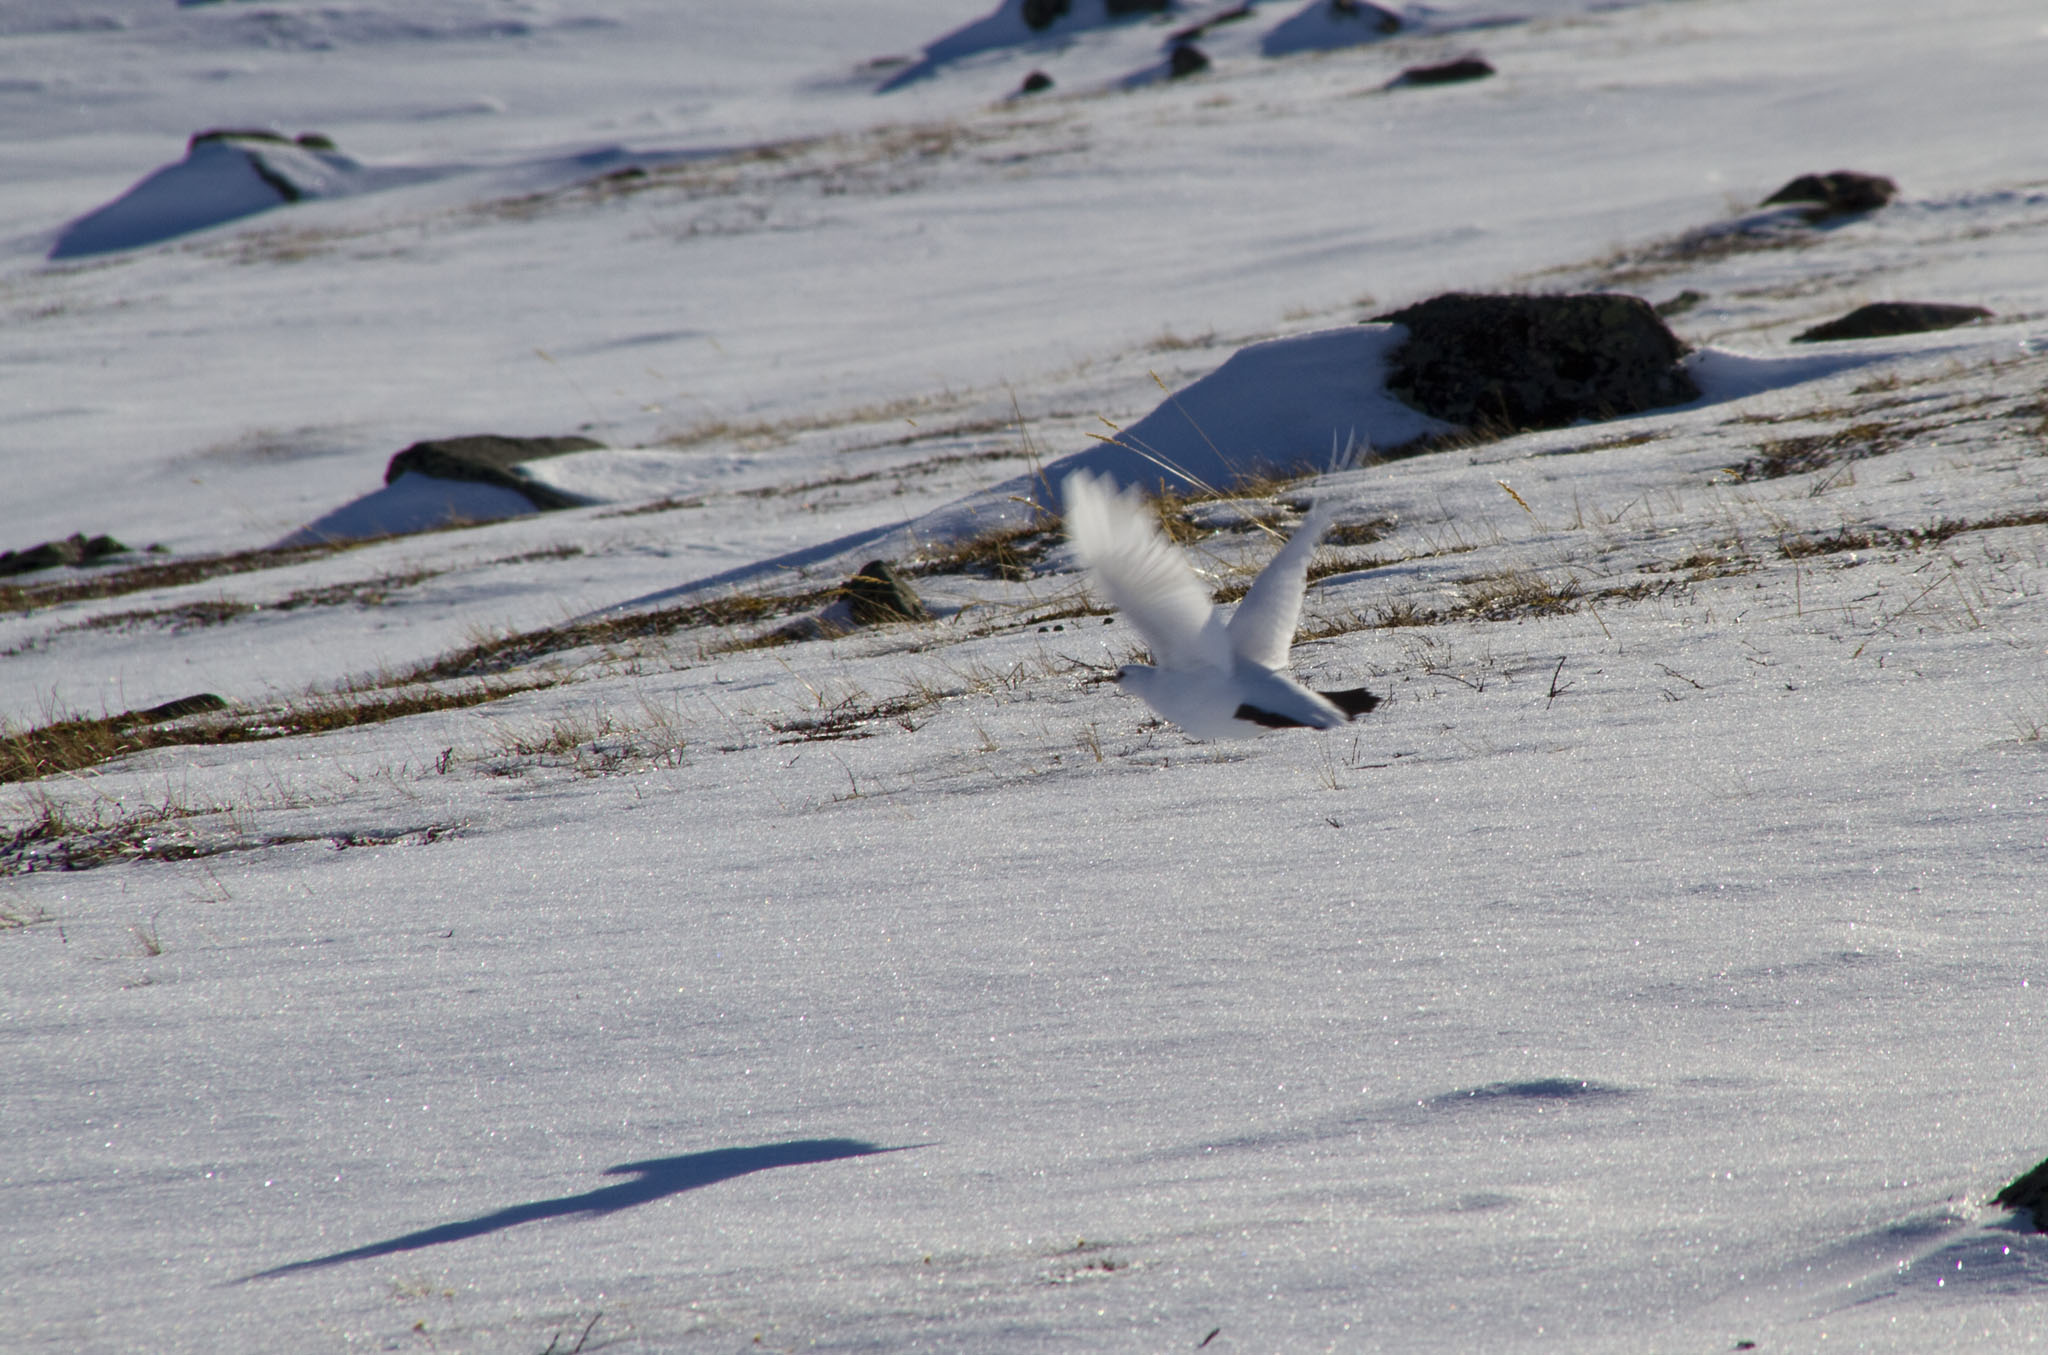 Ptarmigan flying by the phar mountains. Photo: Magnus Strand